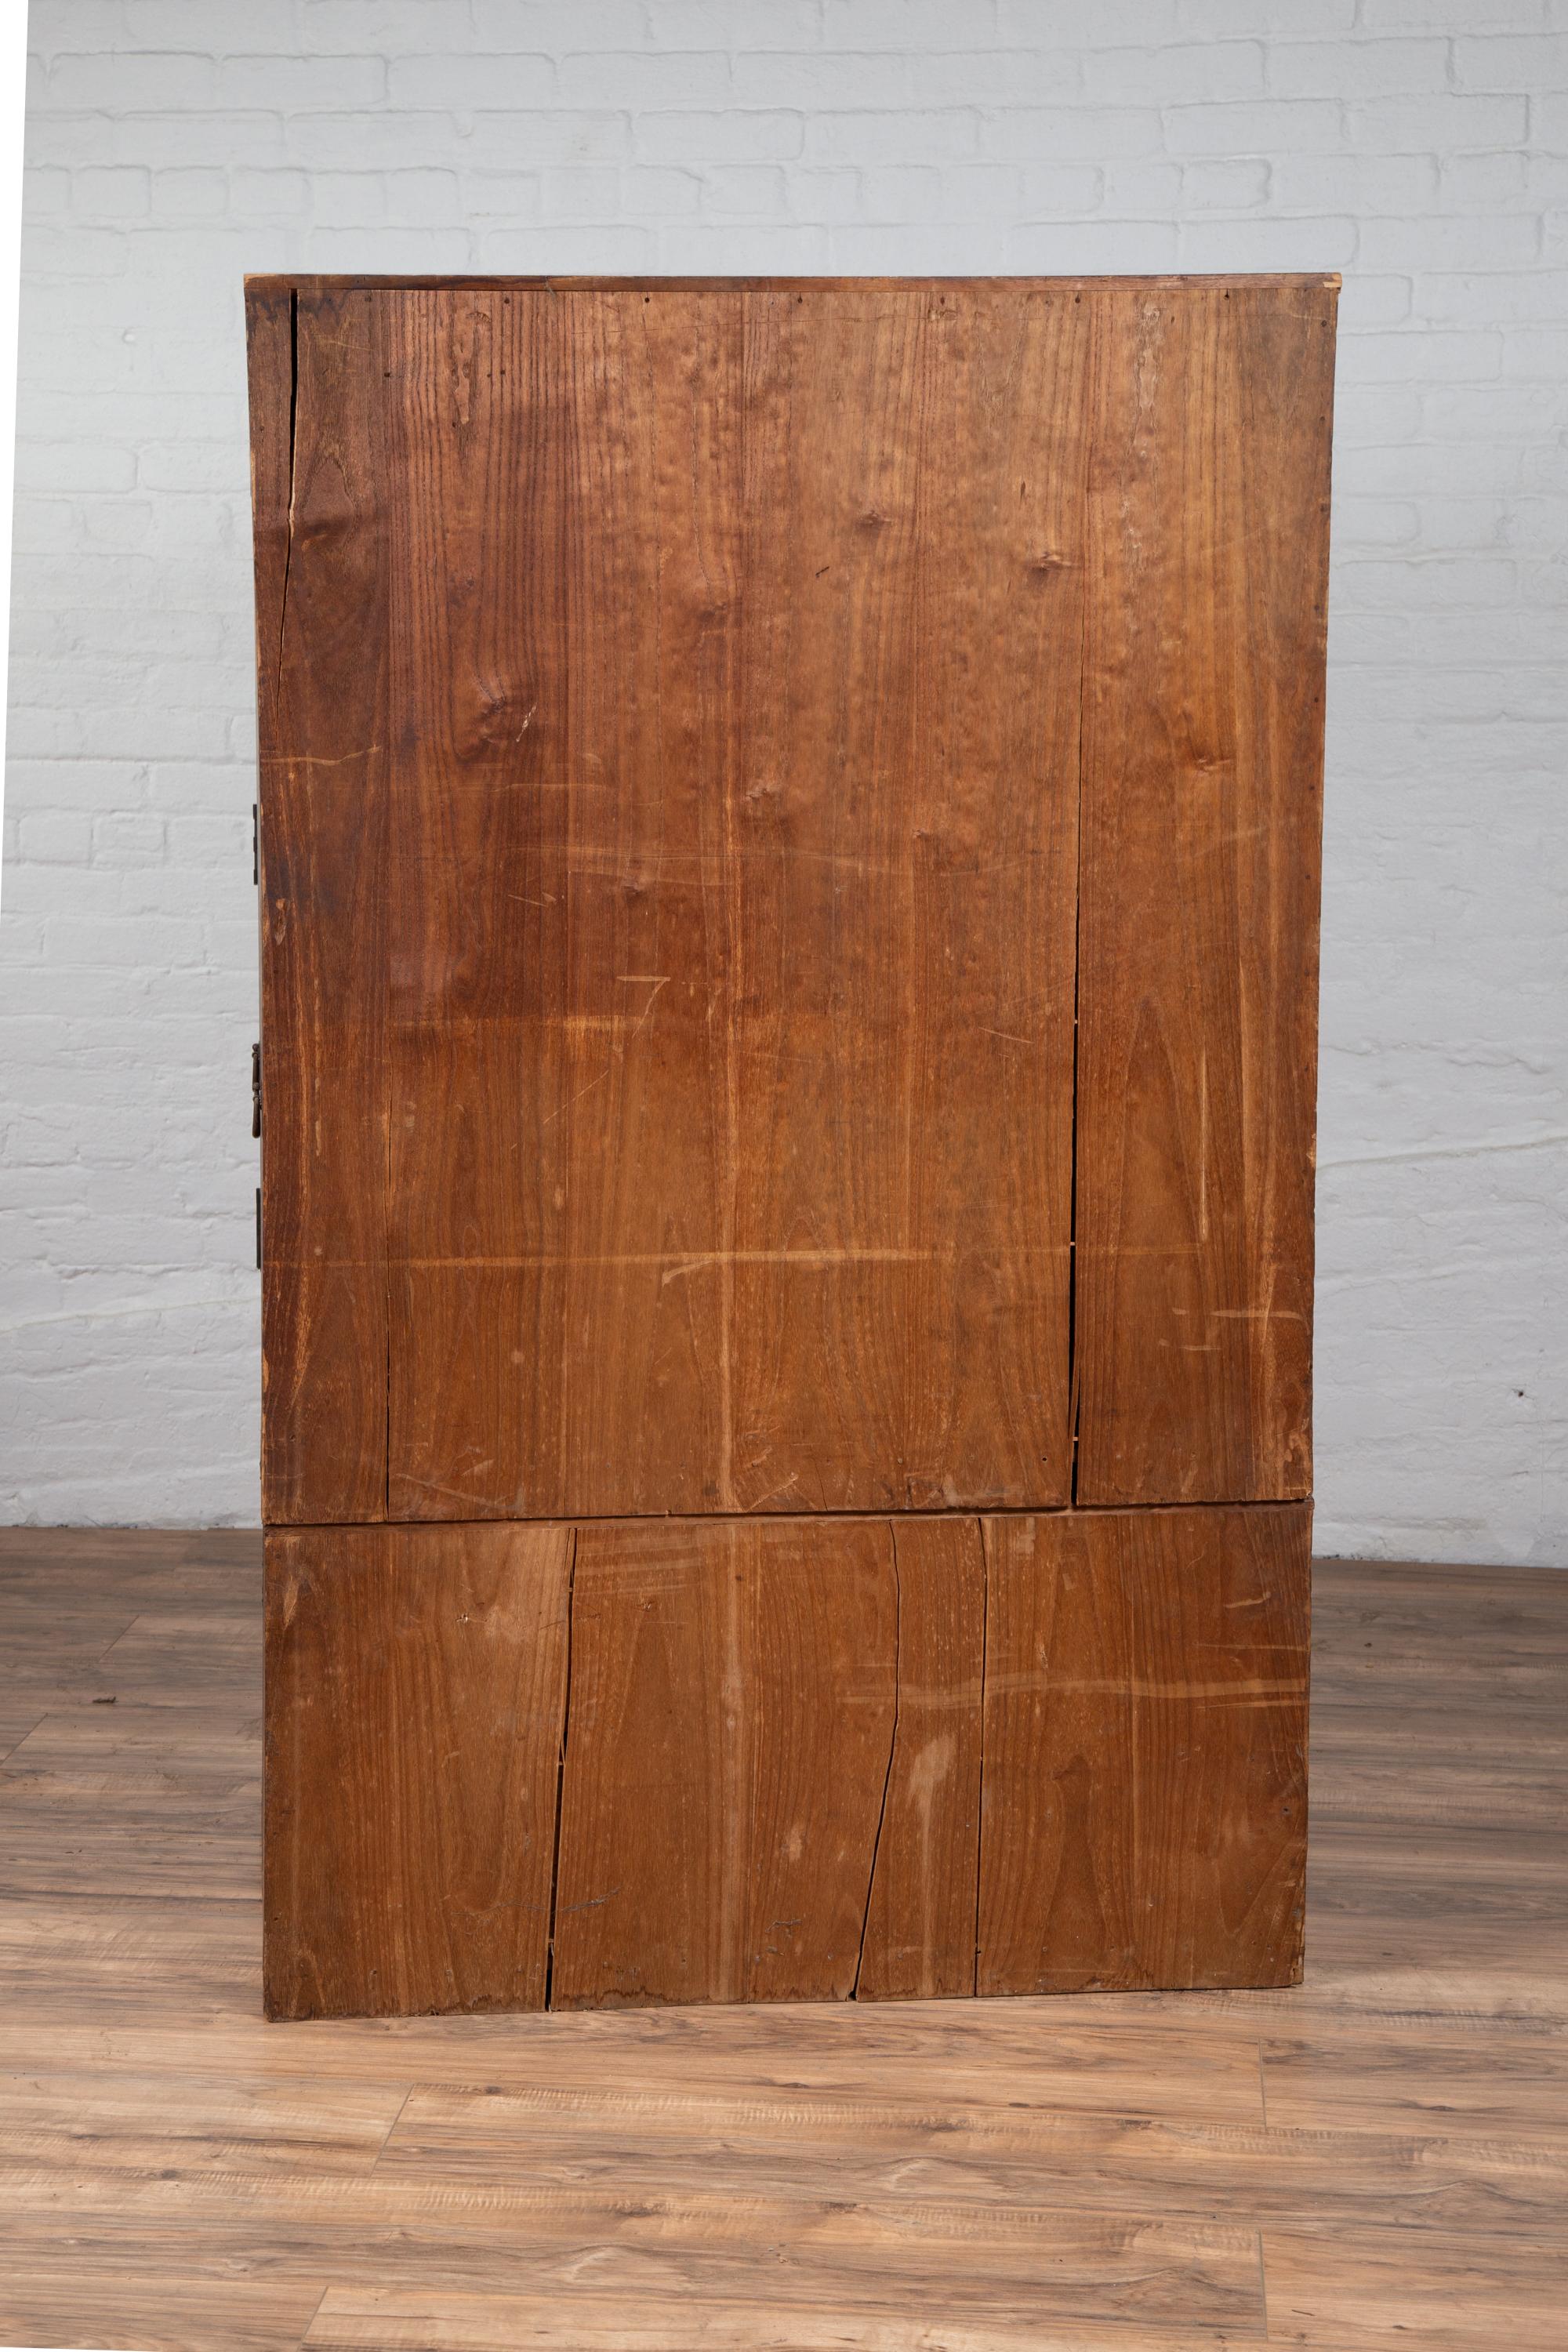 19th Century Japanese Two-Section Kiri Wood Wardrobe with Ombre Finish 3